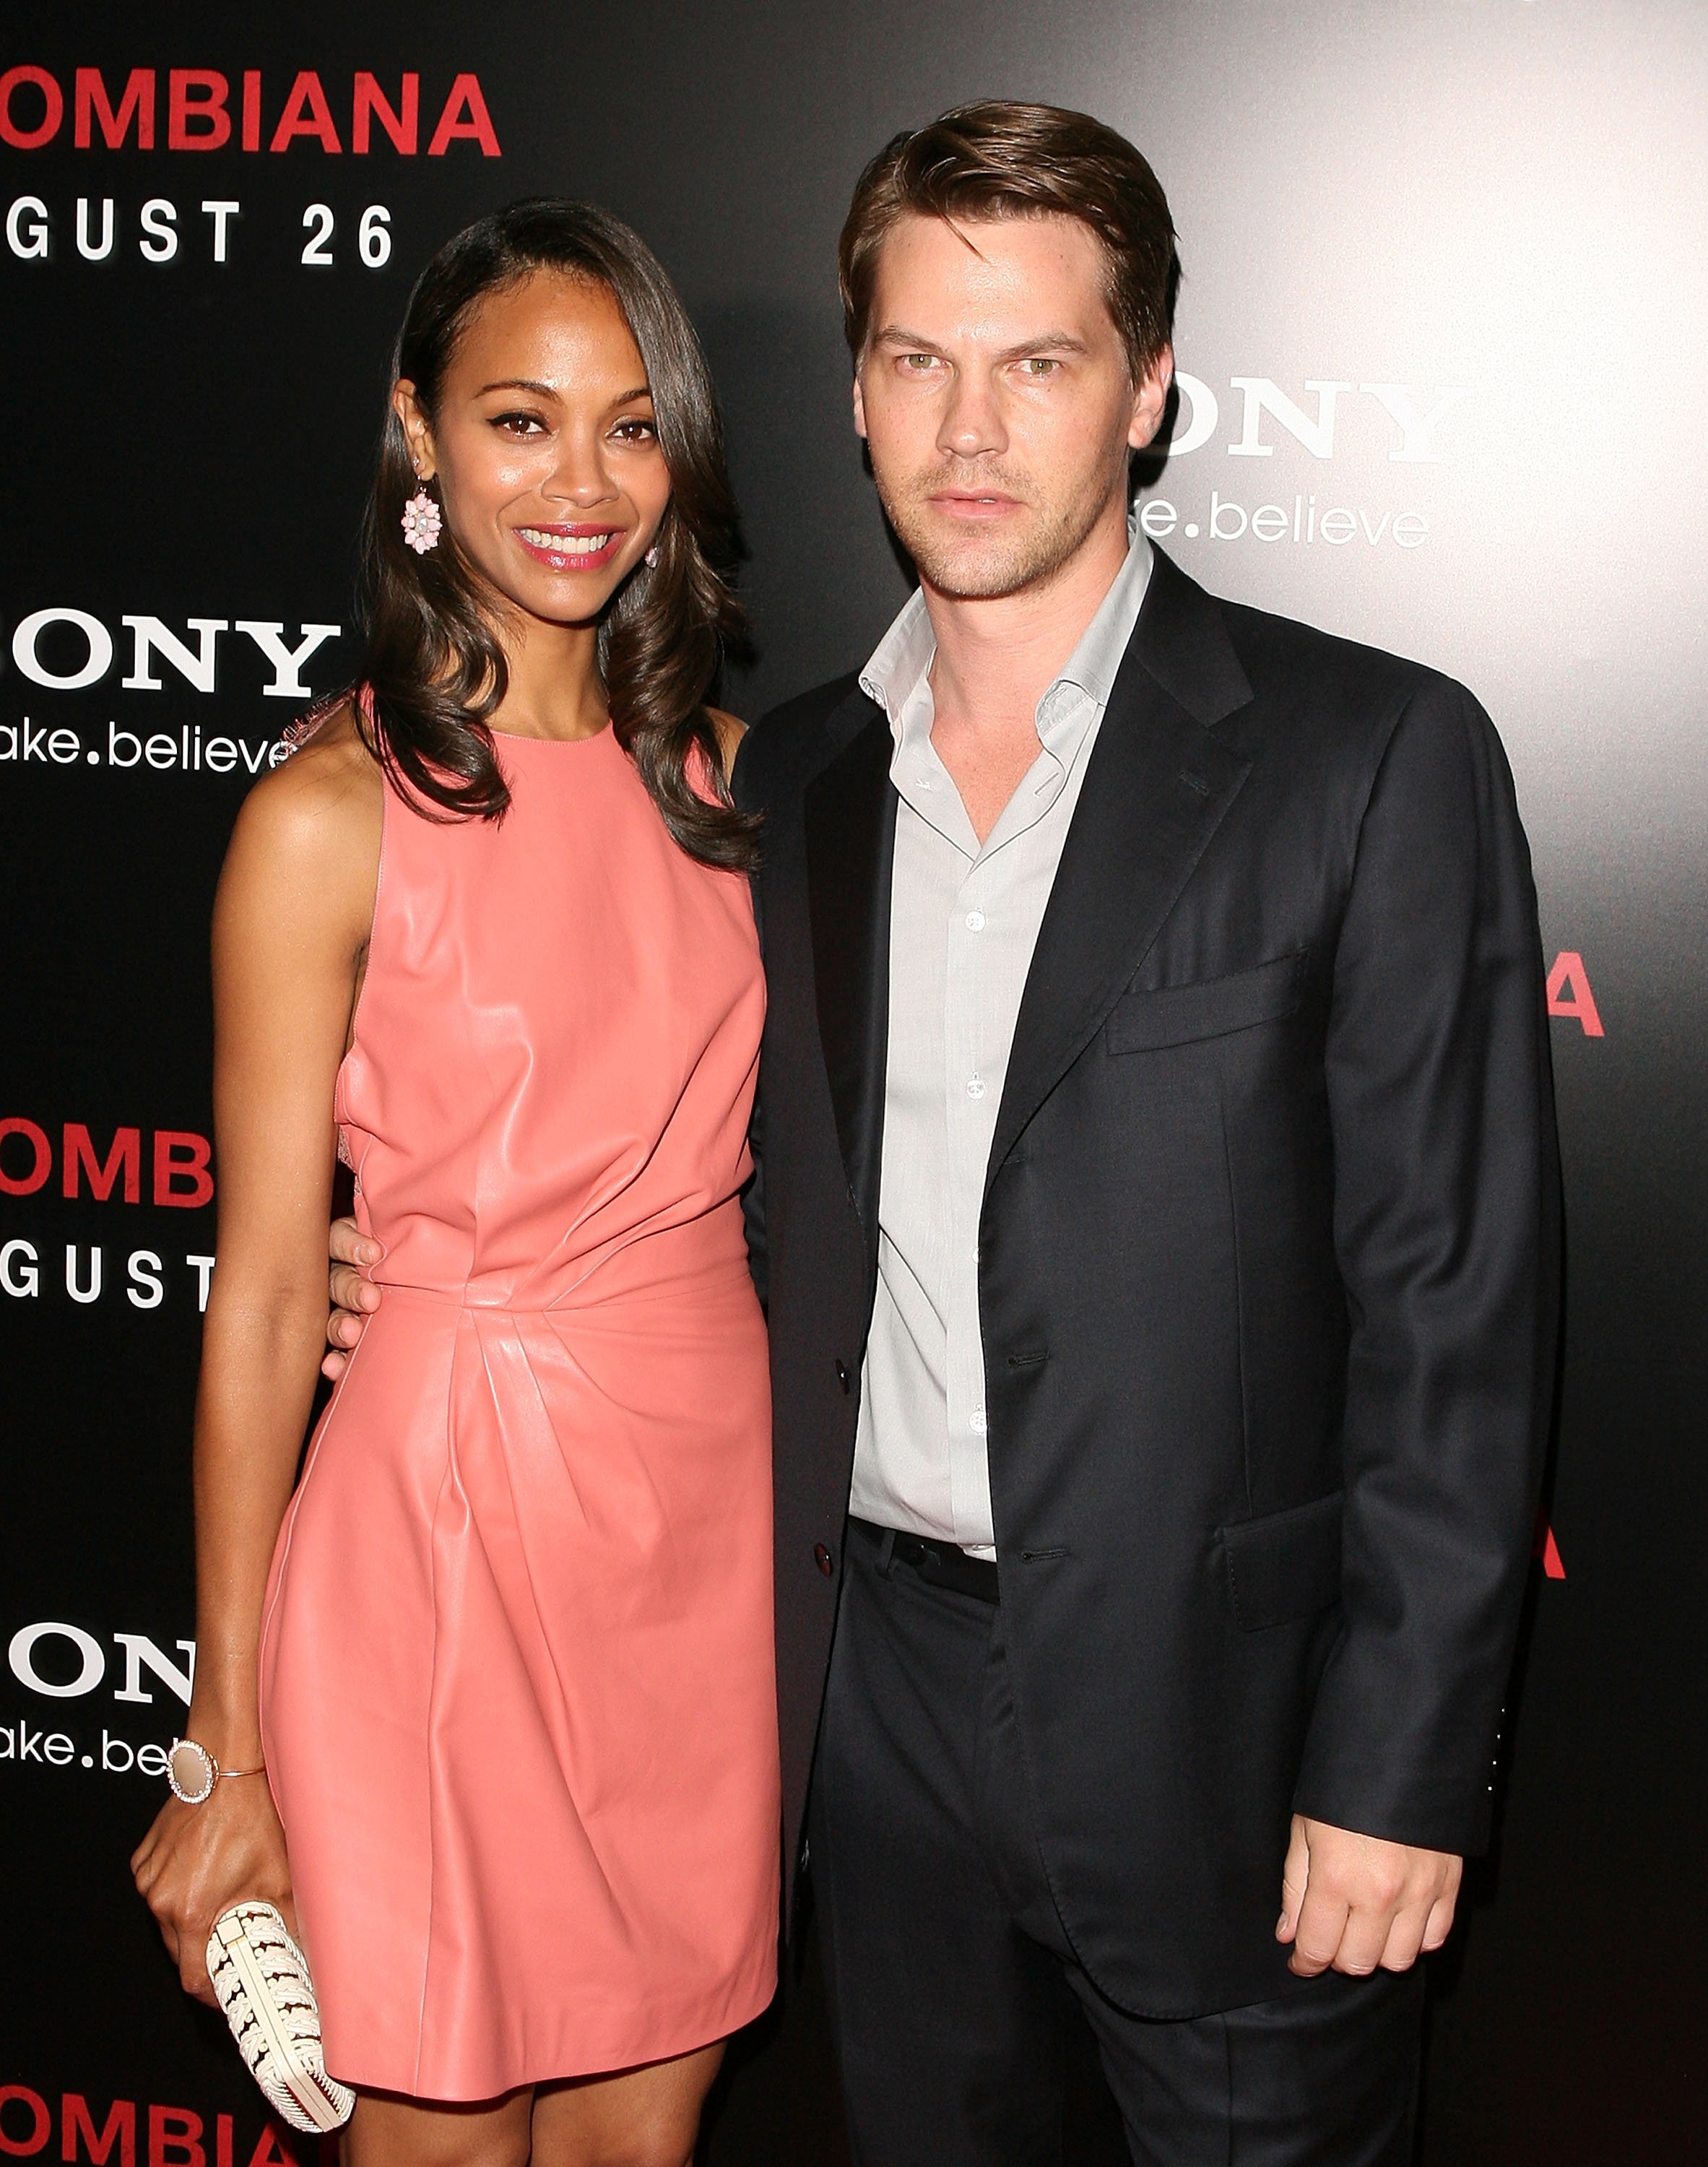 Zoe Saldana and Keith Britton at the special screening of the film "Colombiana" on August 24, 2011, in West Hollywood, California. | Source: Getty Images